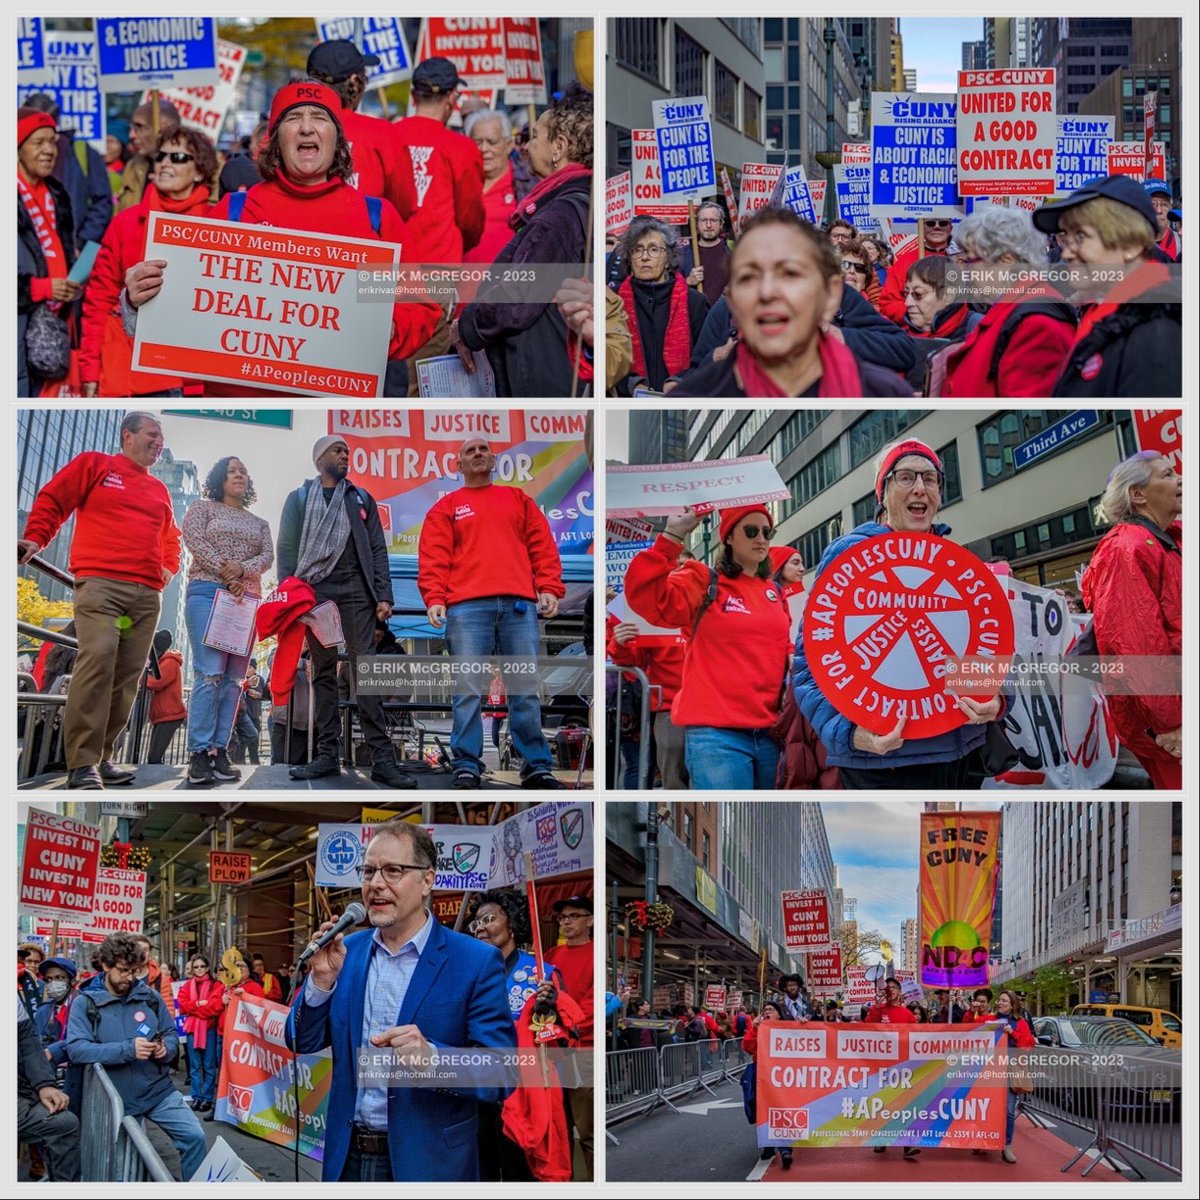 Hundreds of @CUNY Faculty and Staff Rally to Demand #FairContracts flic.kr/s/aHBqjB5v8P

@PSC_CUNY @GovKathyHochul @psccunygc @sharonbeth28 @cuny_free @TheIndypendent @GC_CUNY @GradCenterNews @UFT @jengaboury @PSC_Lehman @QcUnite @Bettina10036 @CUNYRising @cunystruggle